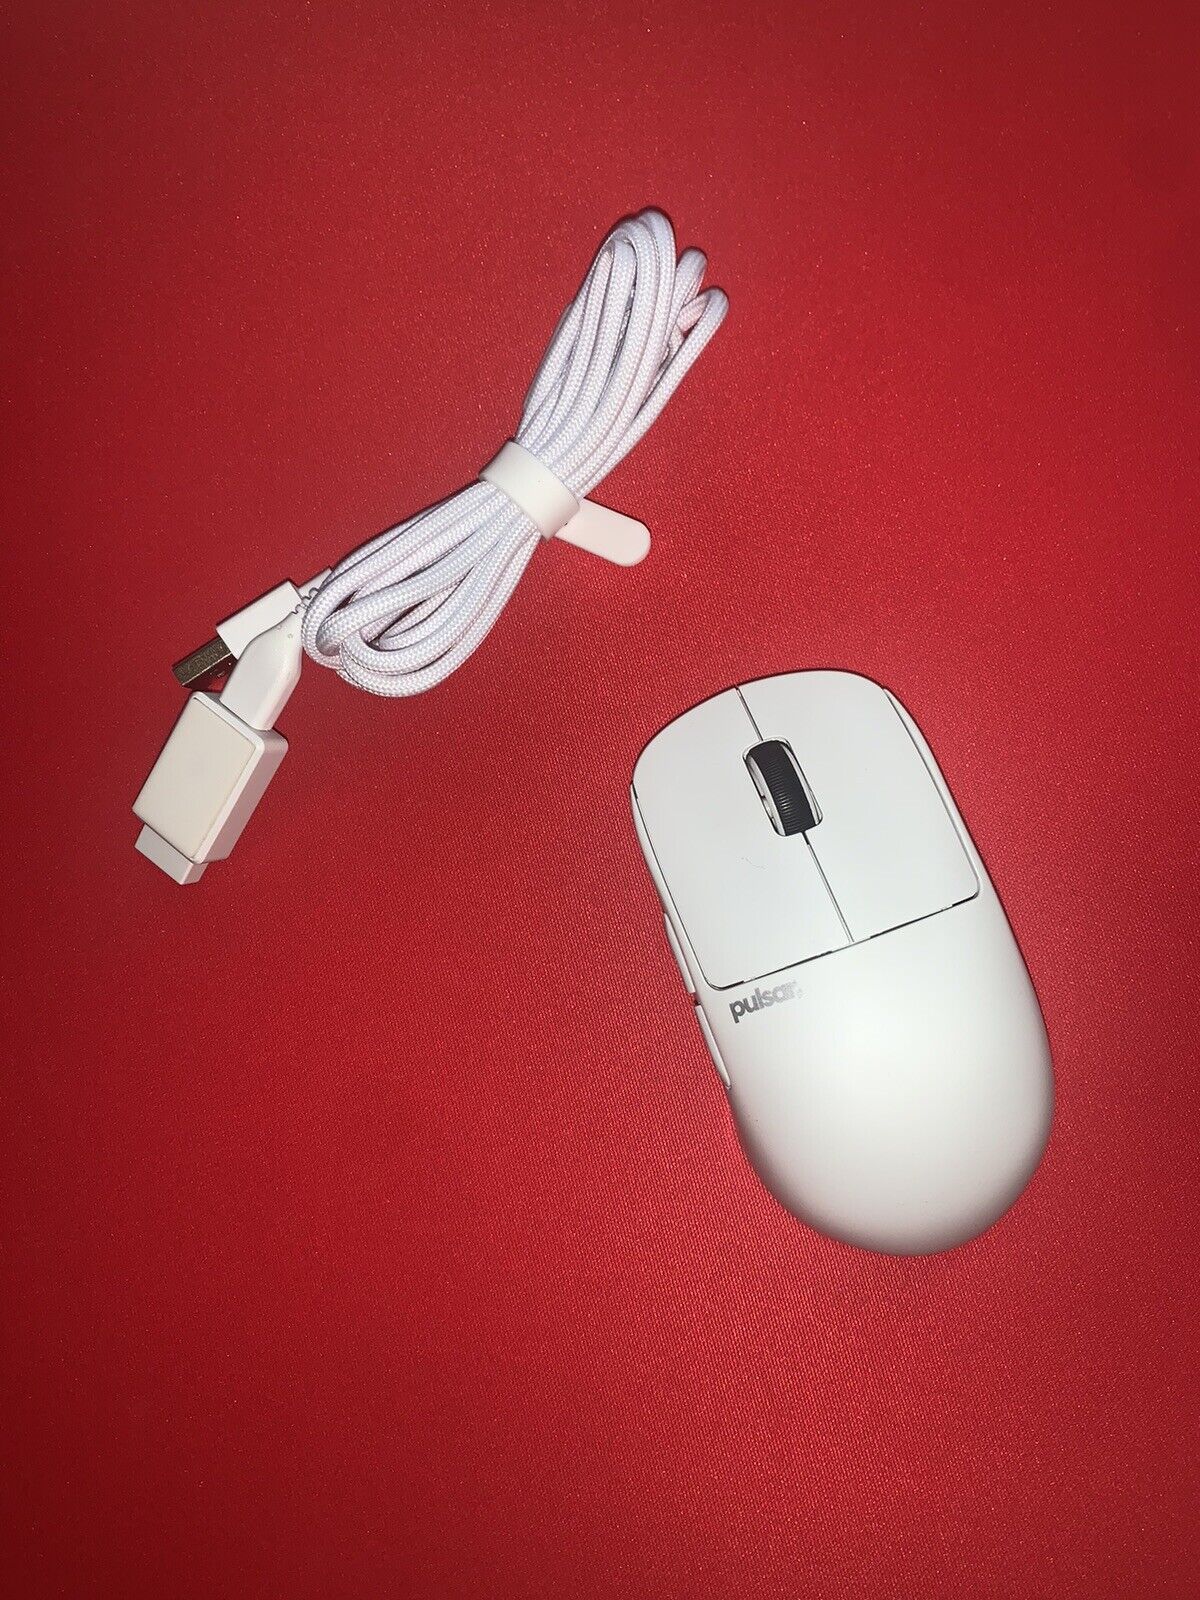 Pulsar X2H Mini Gaming Mouse | USED | US SHIPPING ONLY | READ DESC